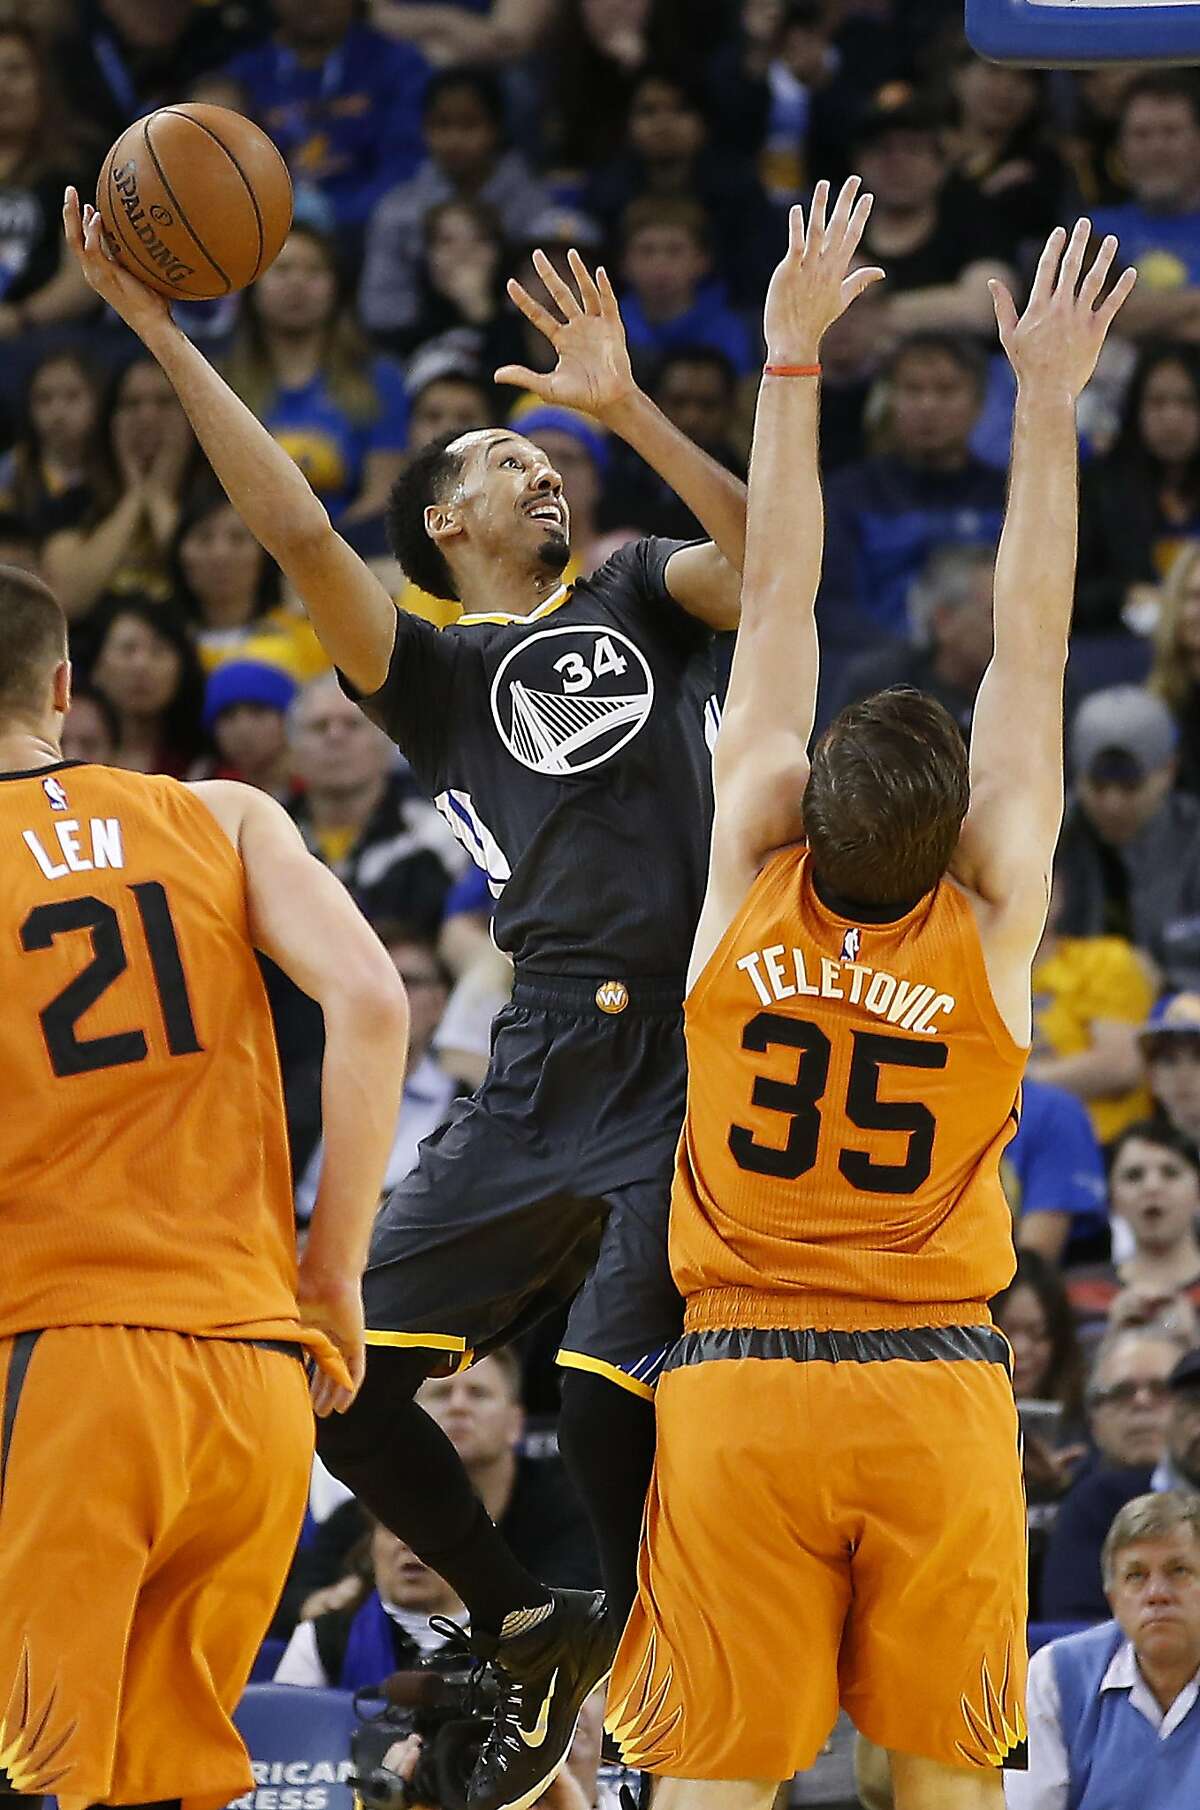 Golden State Warriors guard Shaun Livingston (34) takes a shot over Phoenix Suns forward Mirza Teletovic (35) during the first half NBA game at Oracle Arena in Oakland, Calif., on Saturday, March 12, 2016.